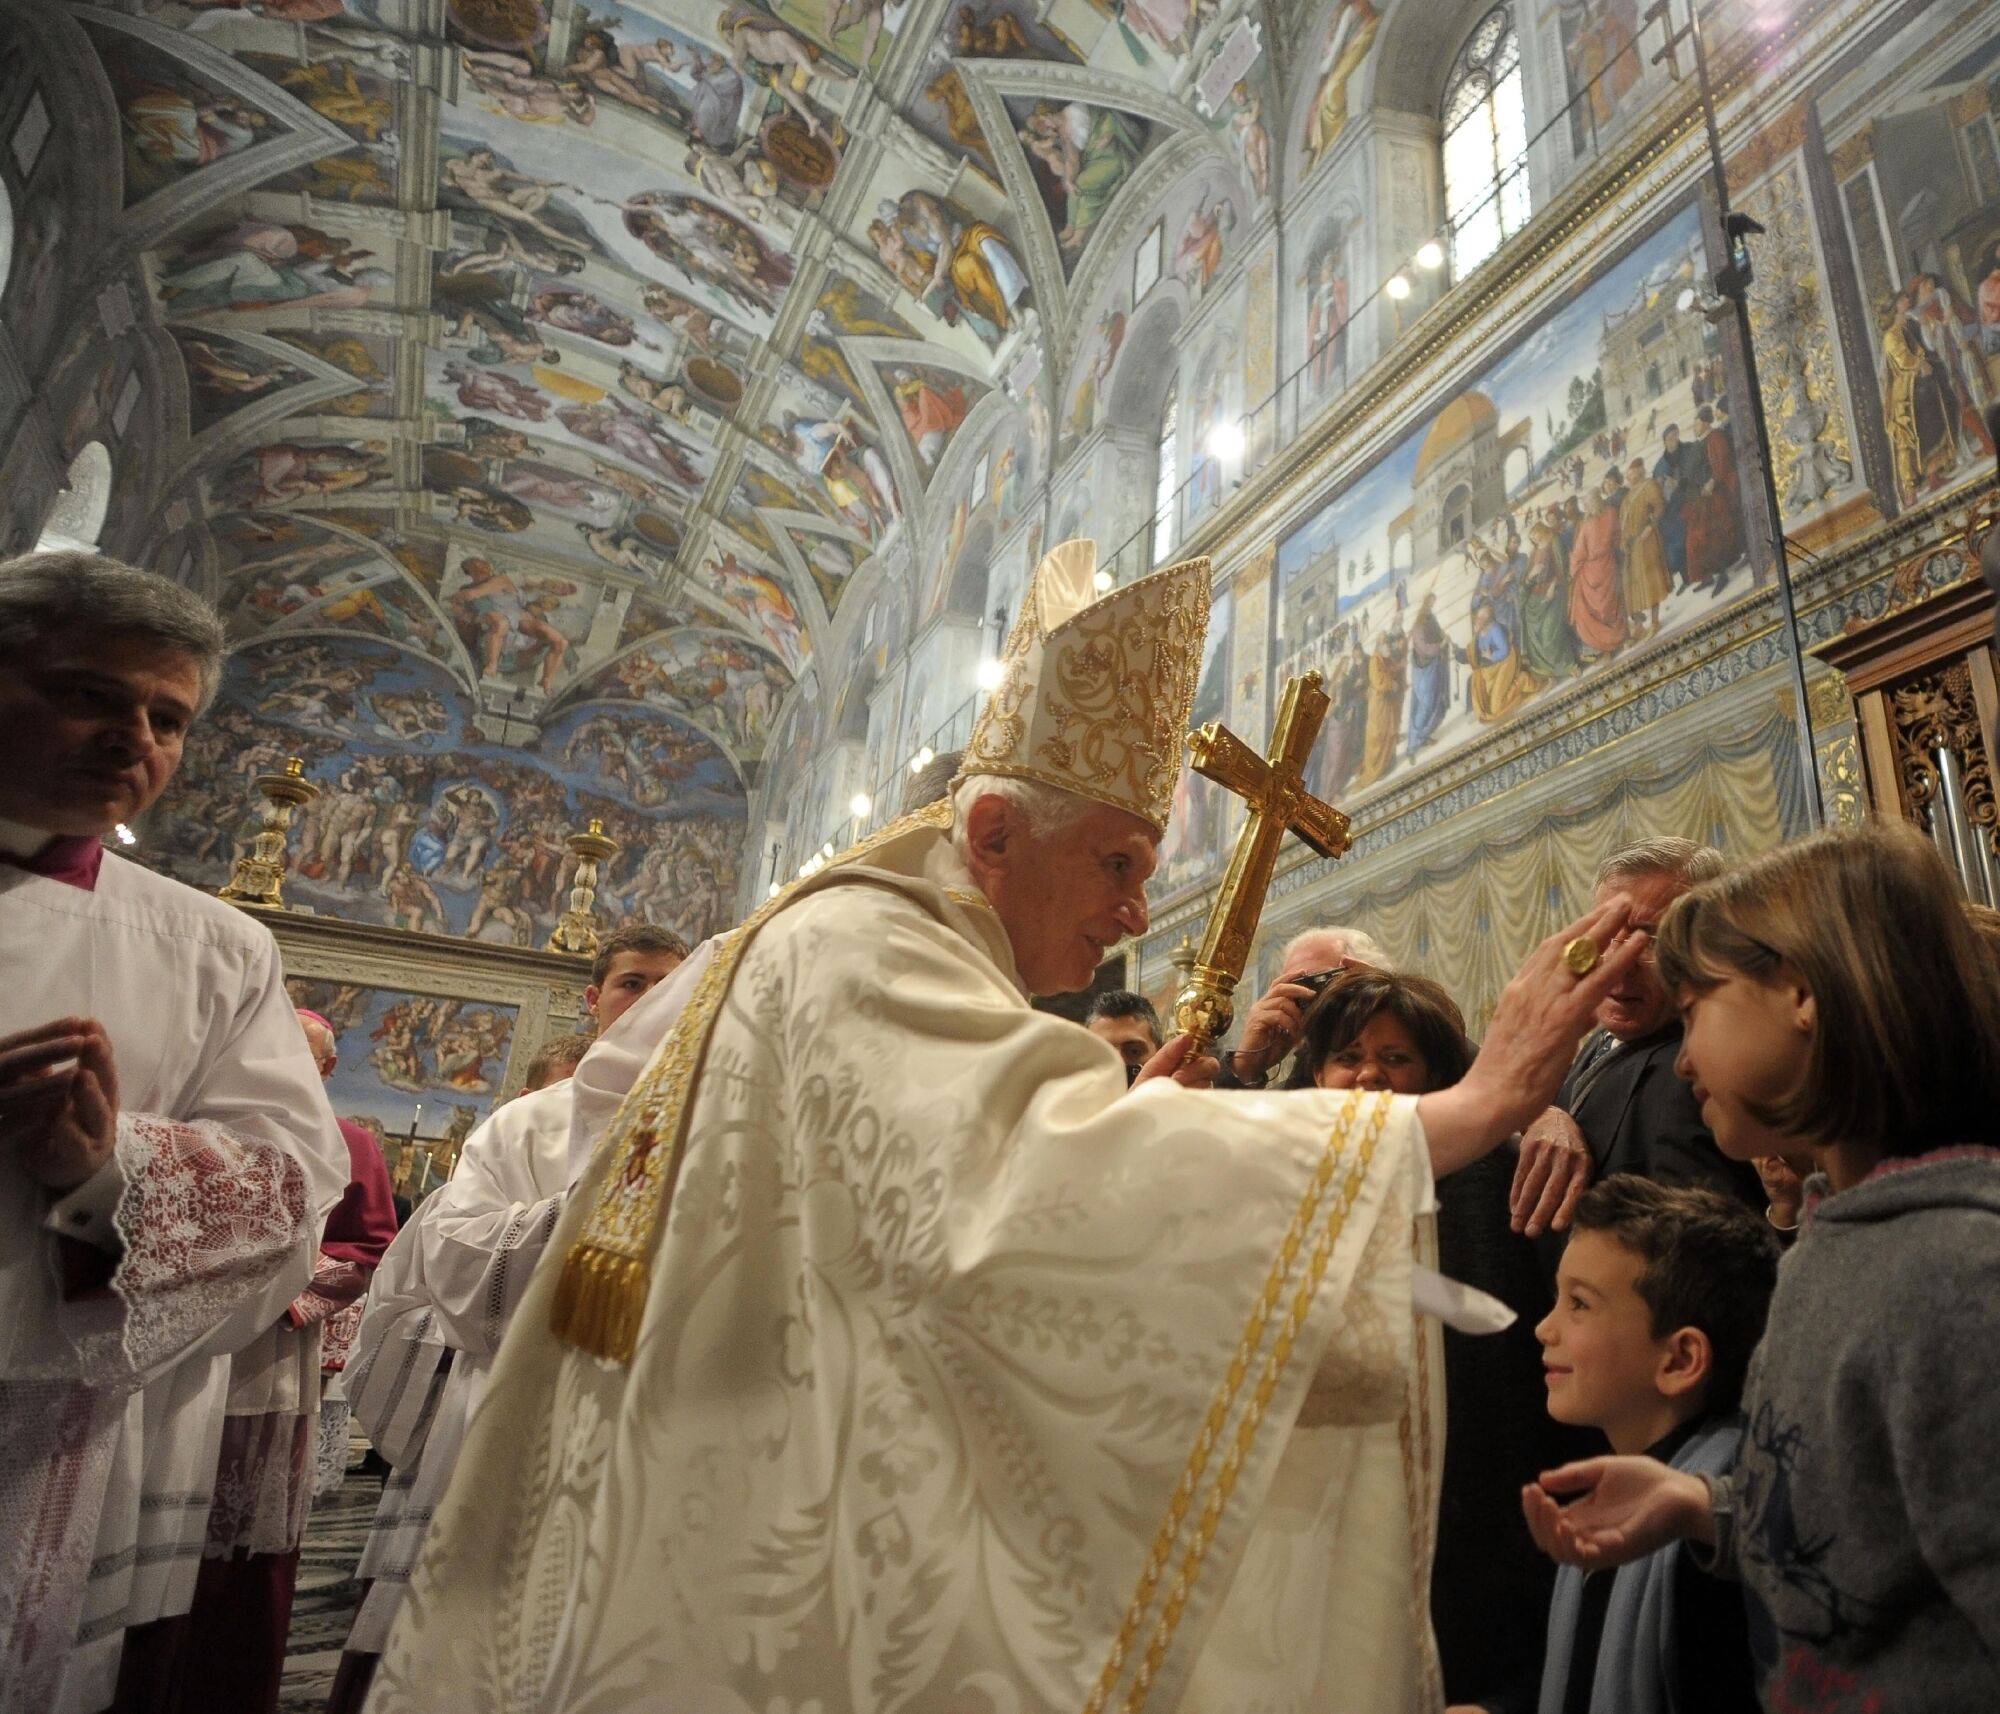 White-robed Pope Benedict XVI reaches out to children in the Sistine Chapel.